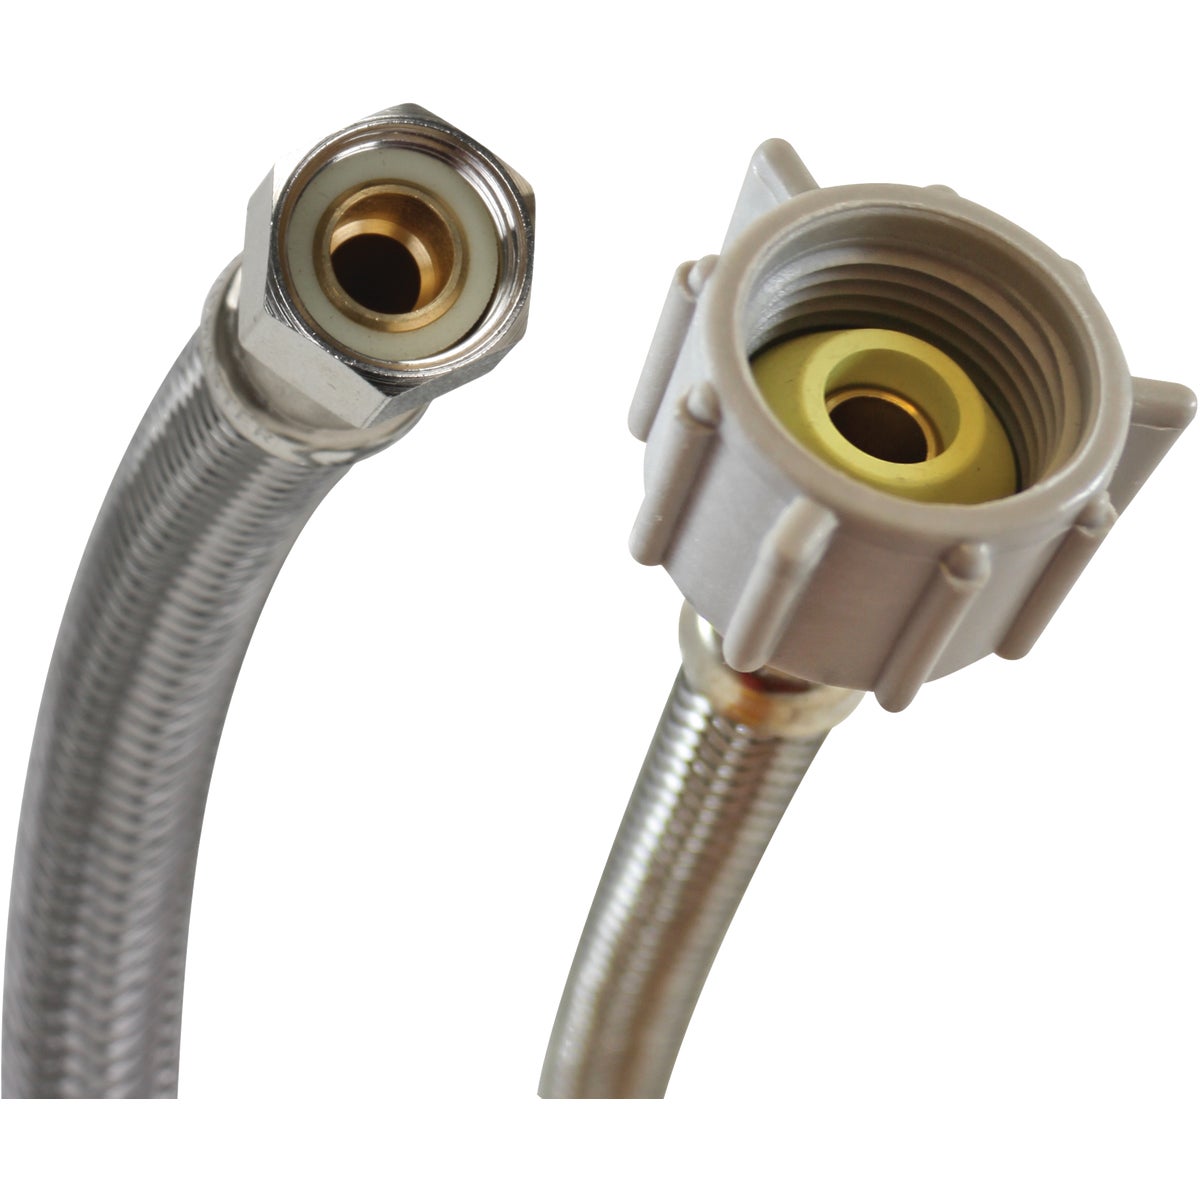 Fluidmaster 3/8 In. Comp x 7/8 In. Ballcock x 20 In. L Braided Stainless Steel Toilet Connector